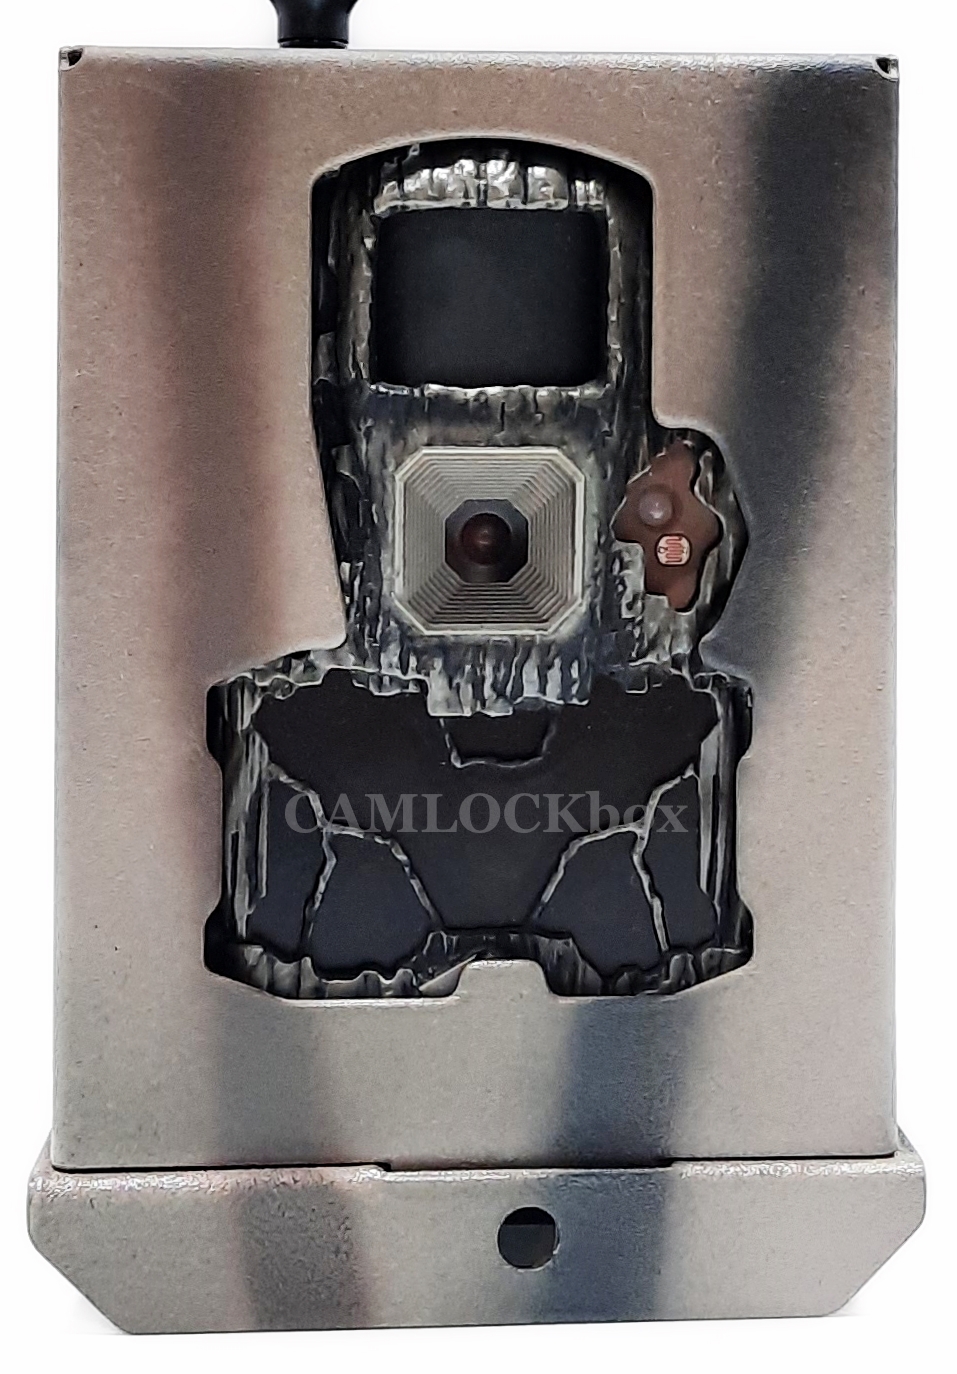 only Trail Hawk Camlock Security Box for Stealth Cam QS Box 